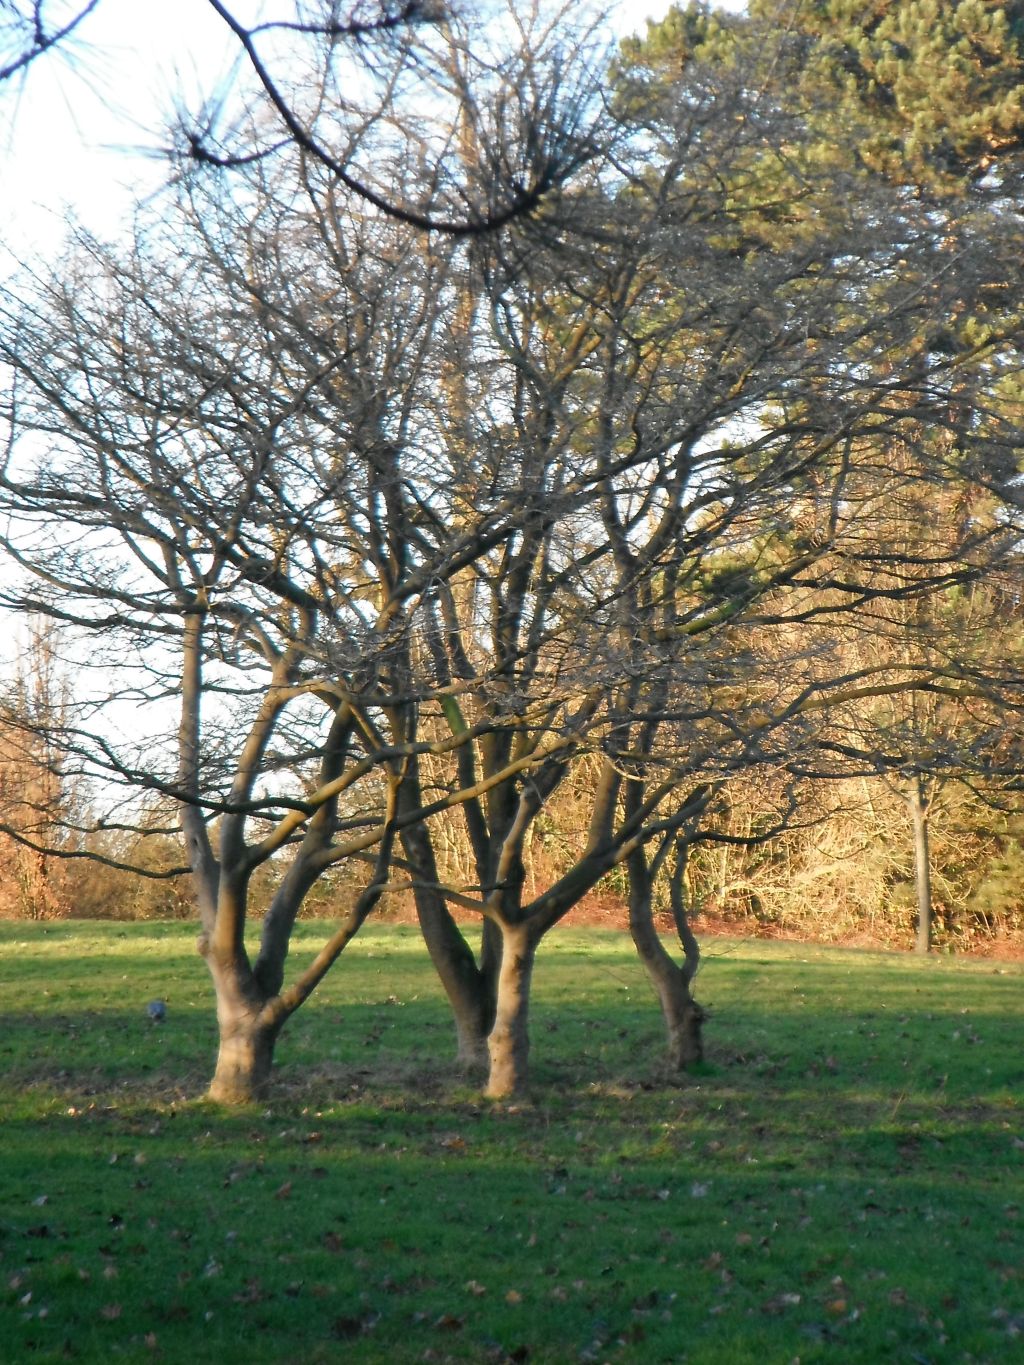 Photo taken by me - trees - Bruntwood Park Manchester